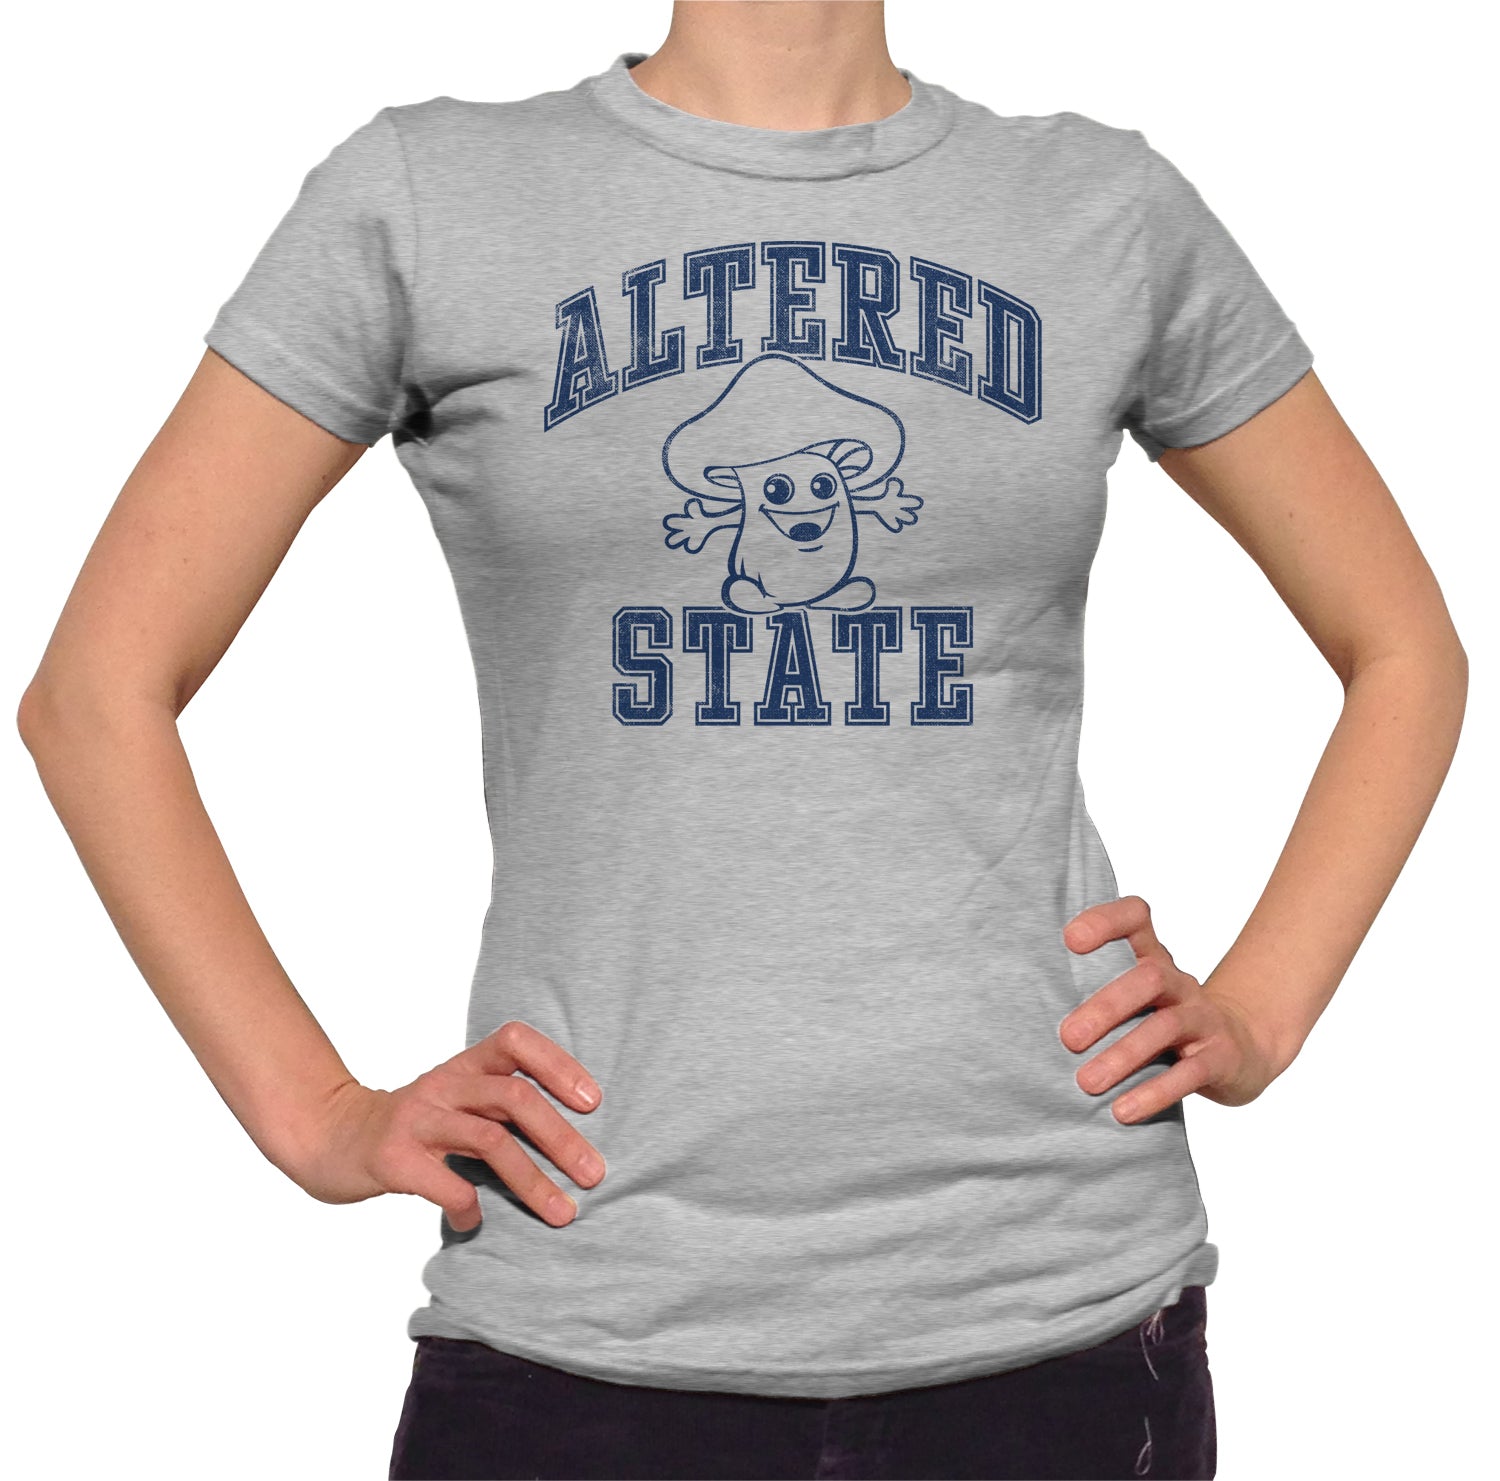 Women's Altered State T-Shirt